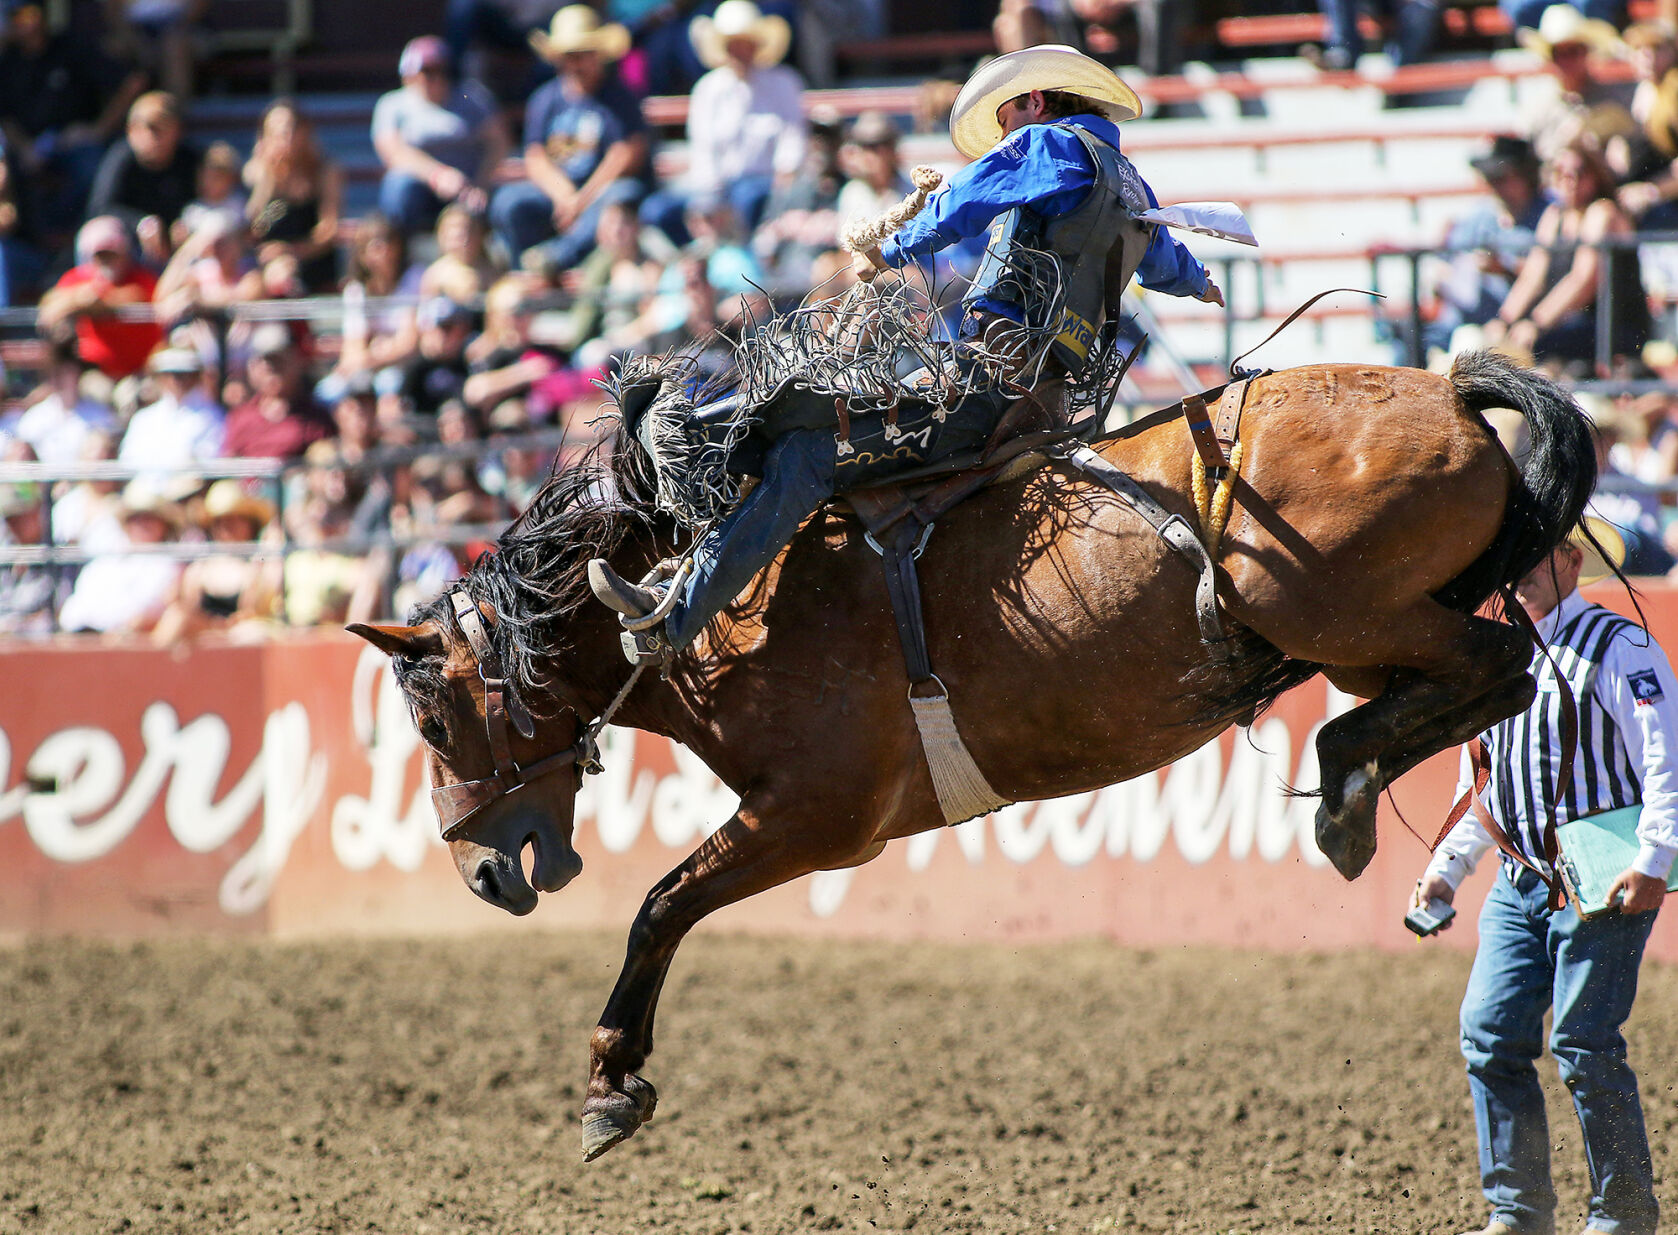 Championship Monday at the Ellensburg Rodeo proves fruitful for